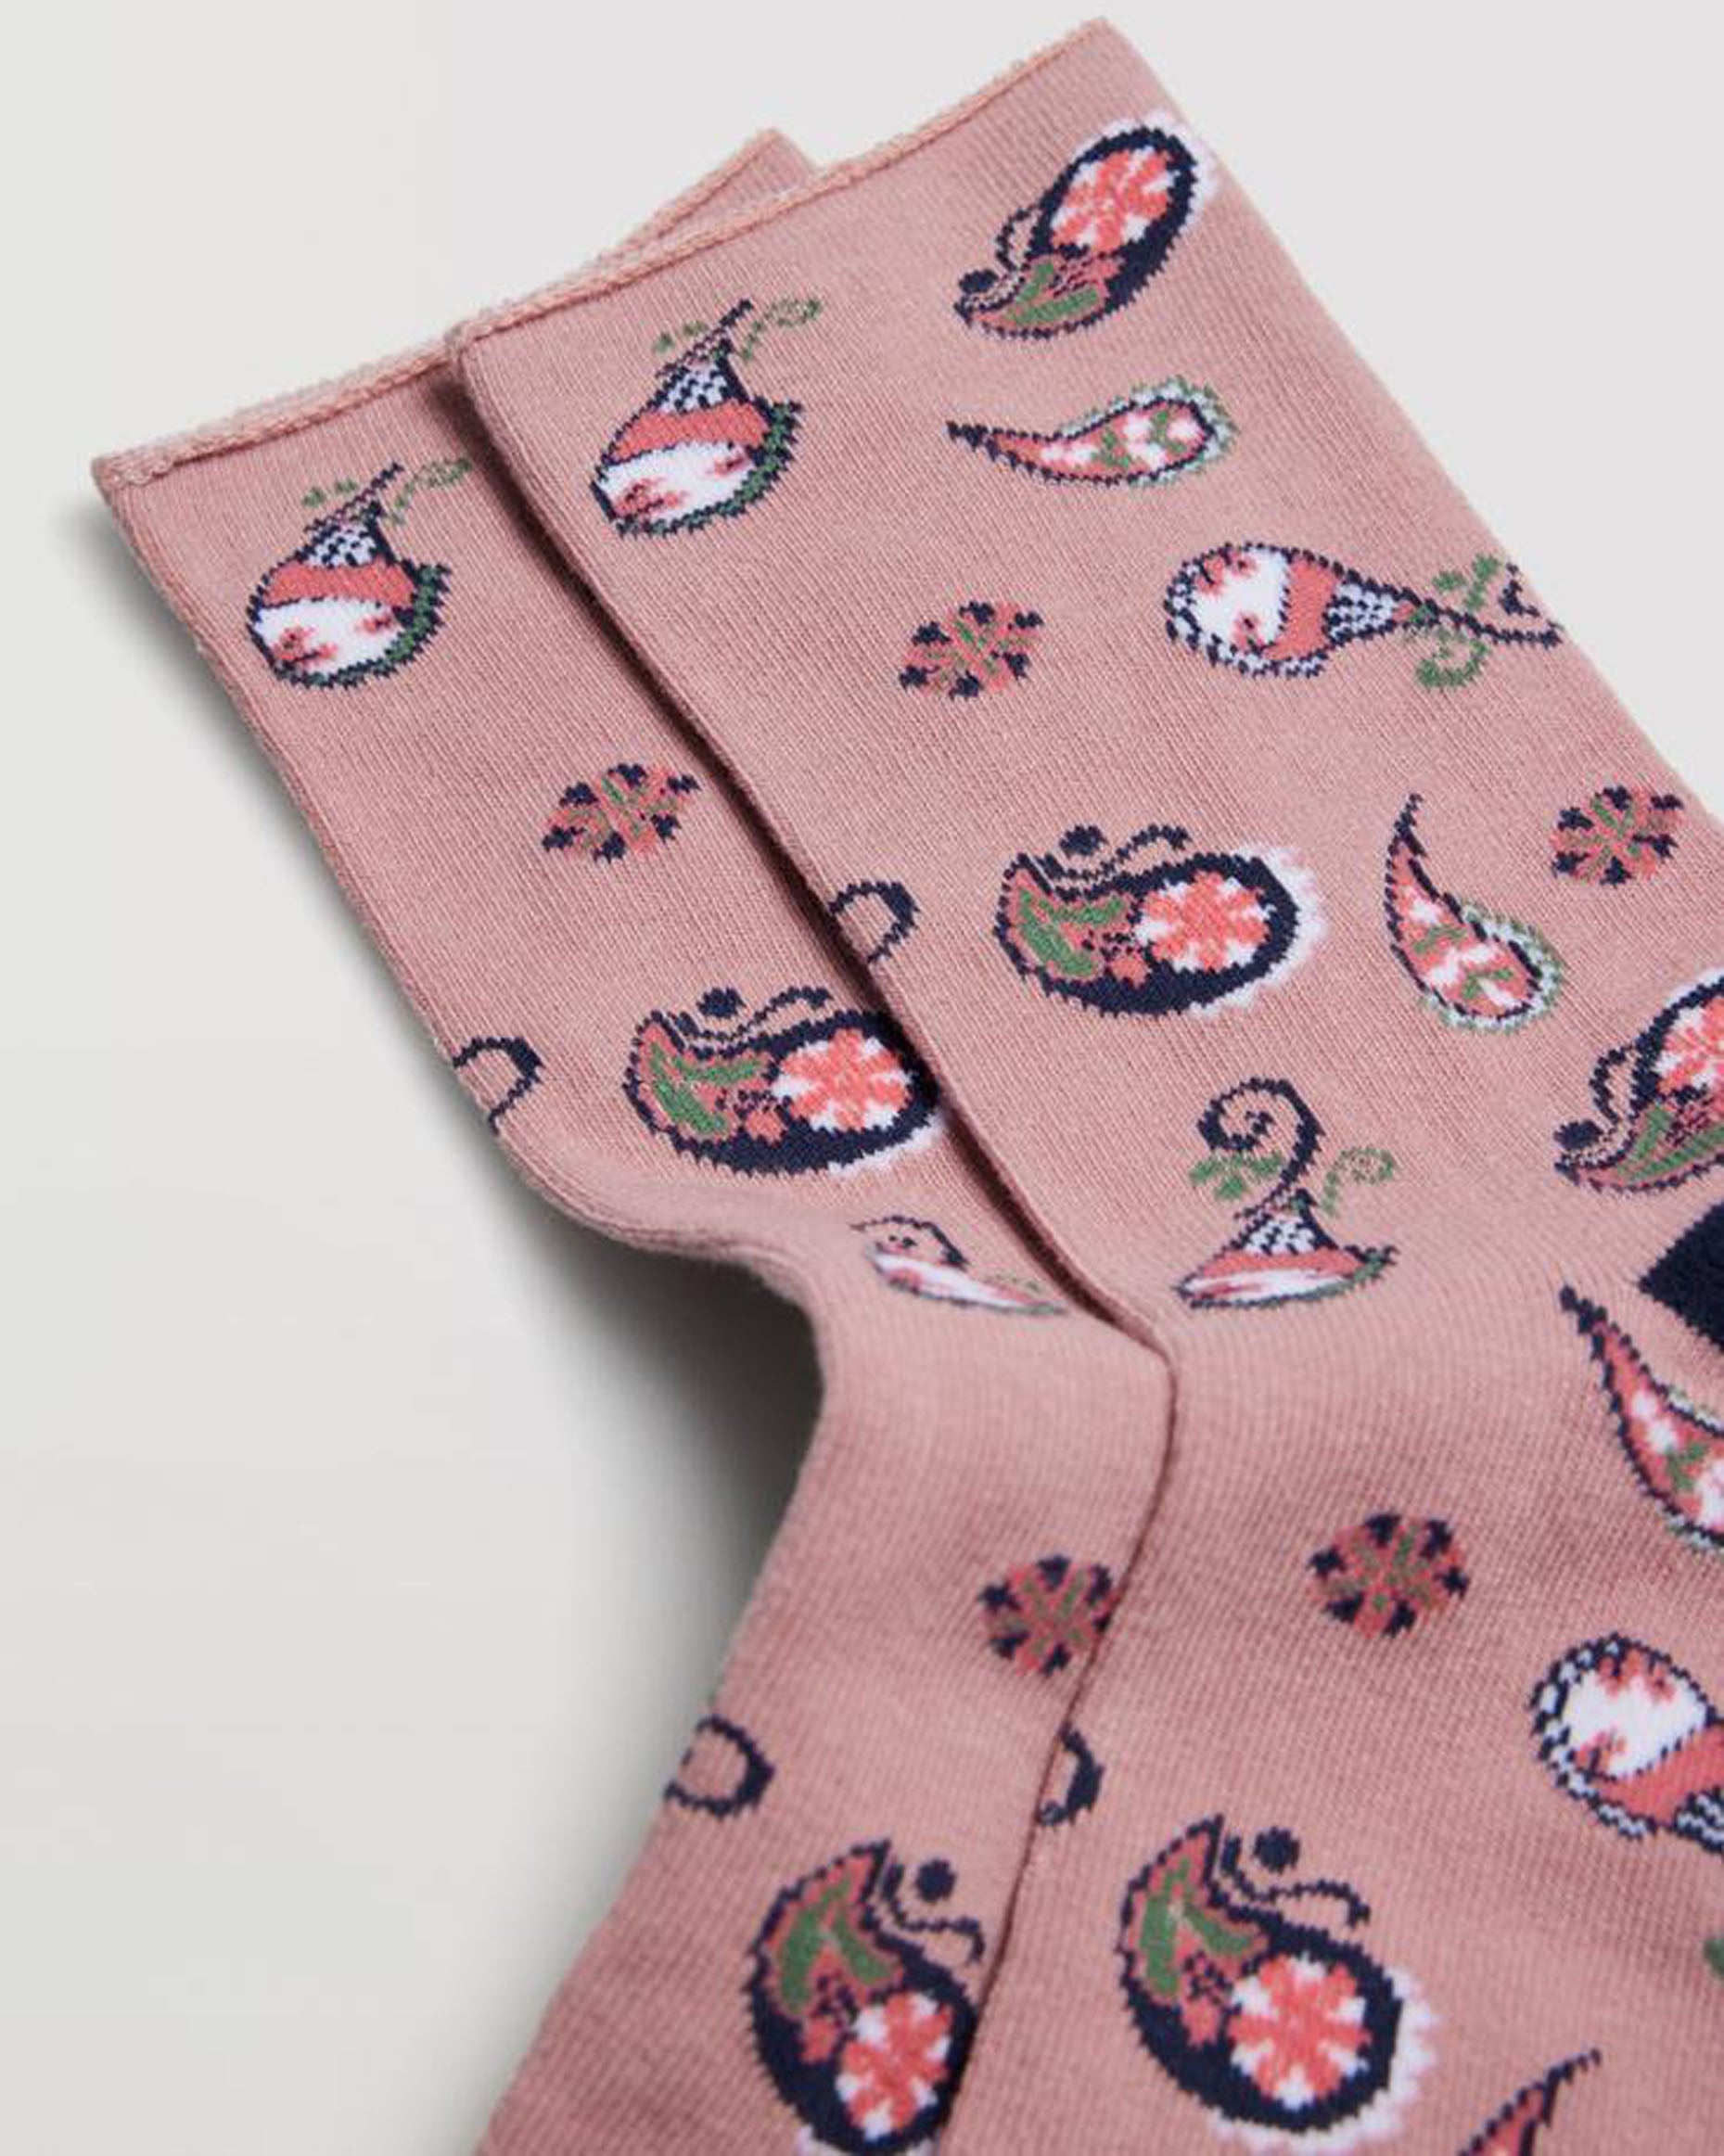 Ysabel Mora 12881 Paisley Socks - Pale pink cotton socks with an all over paisley style pattern in navy, sage green and white, navy heel and toe and no cuff.